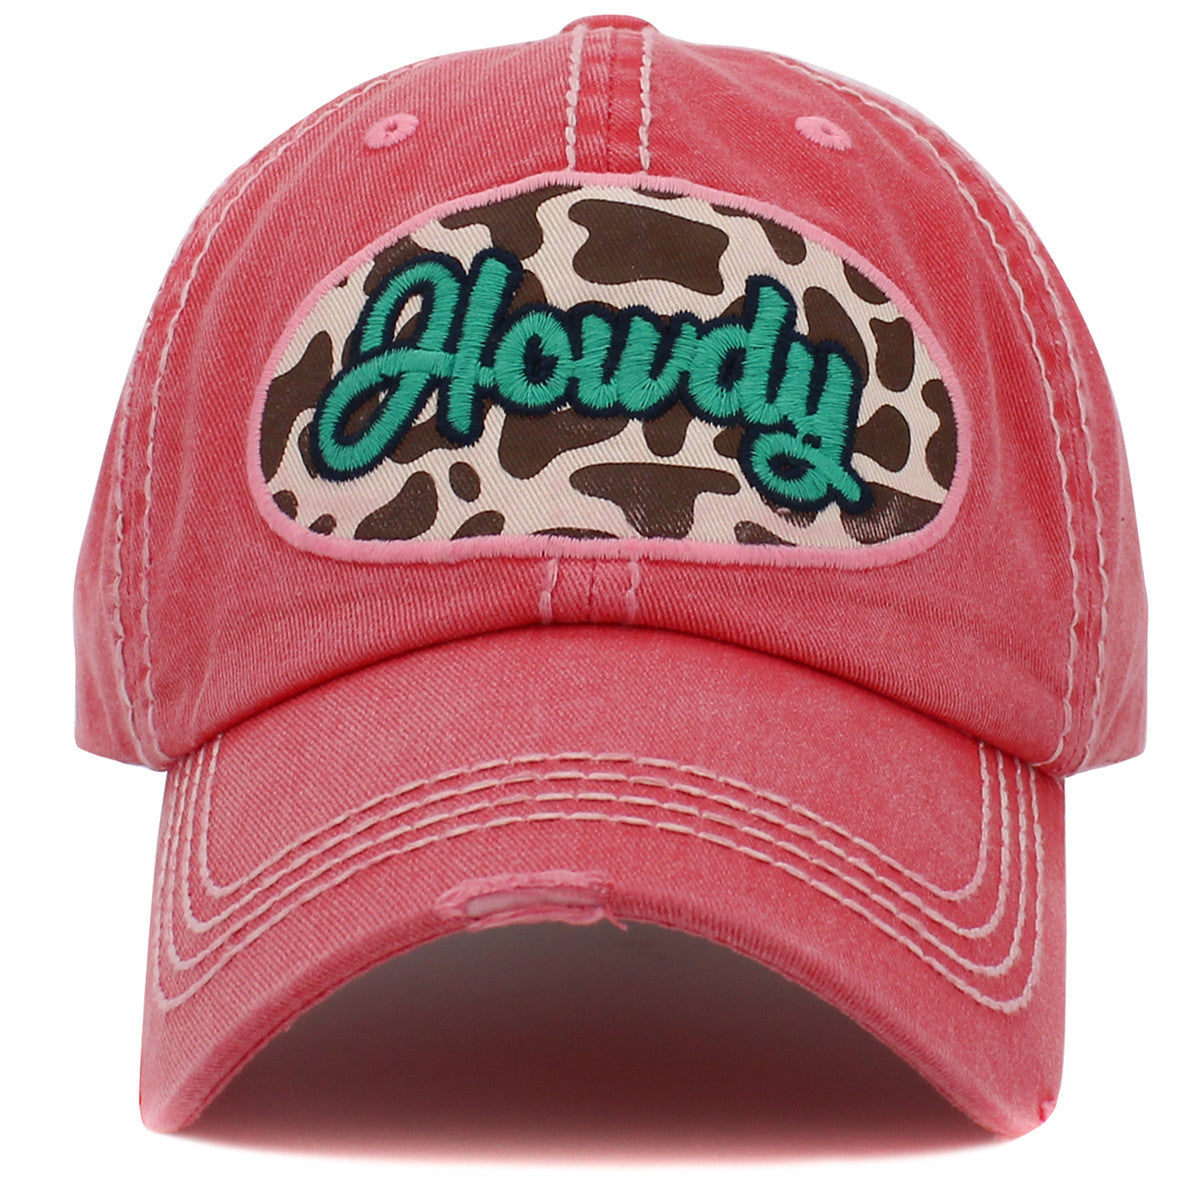 KBV-1495 Howdy Cow Print Hot Pink